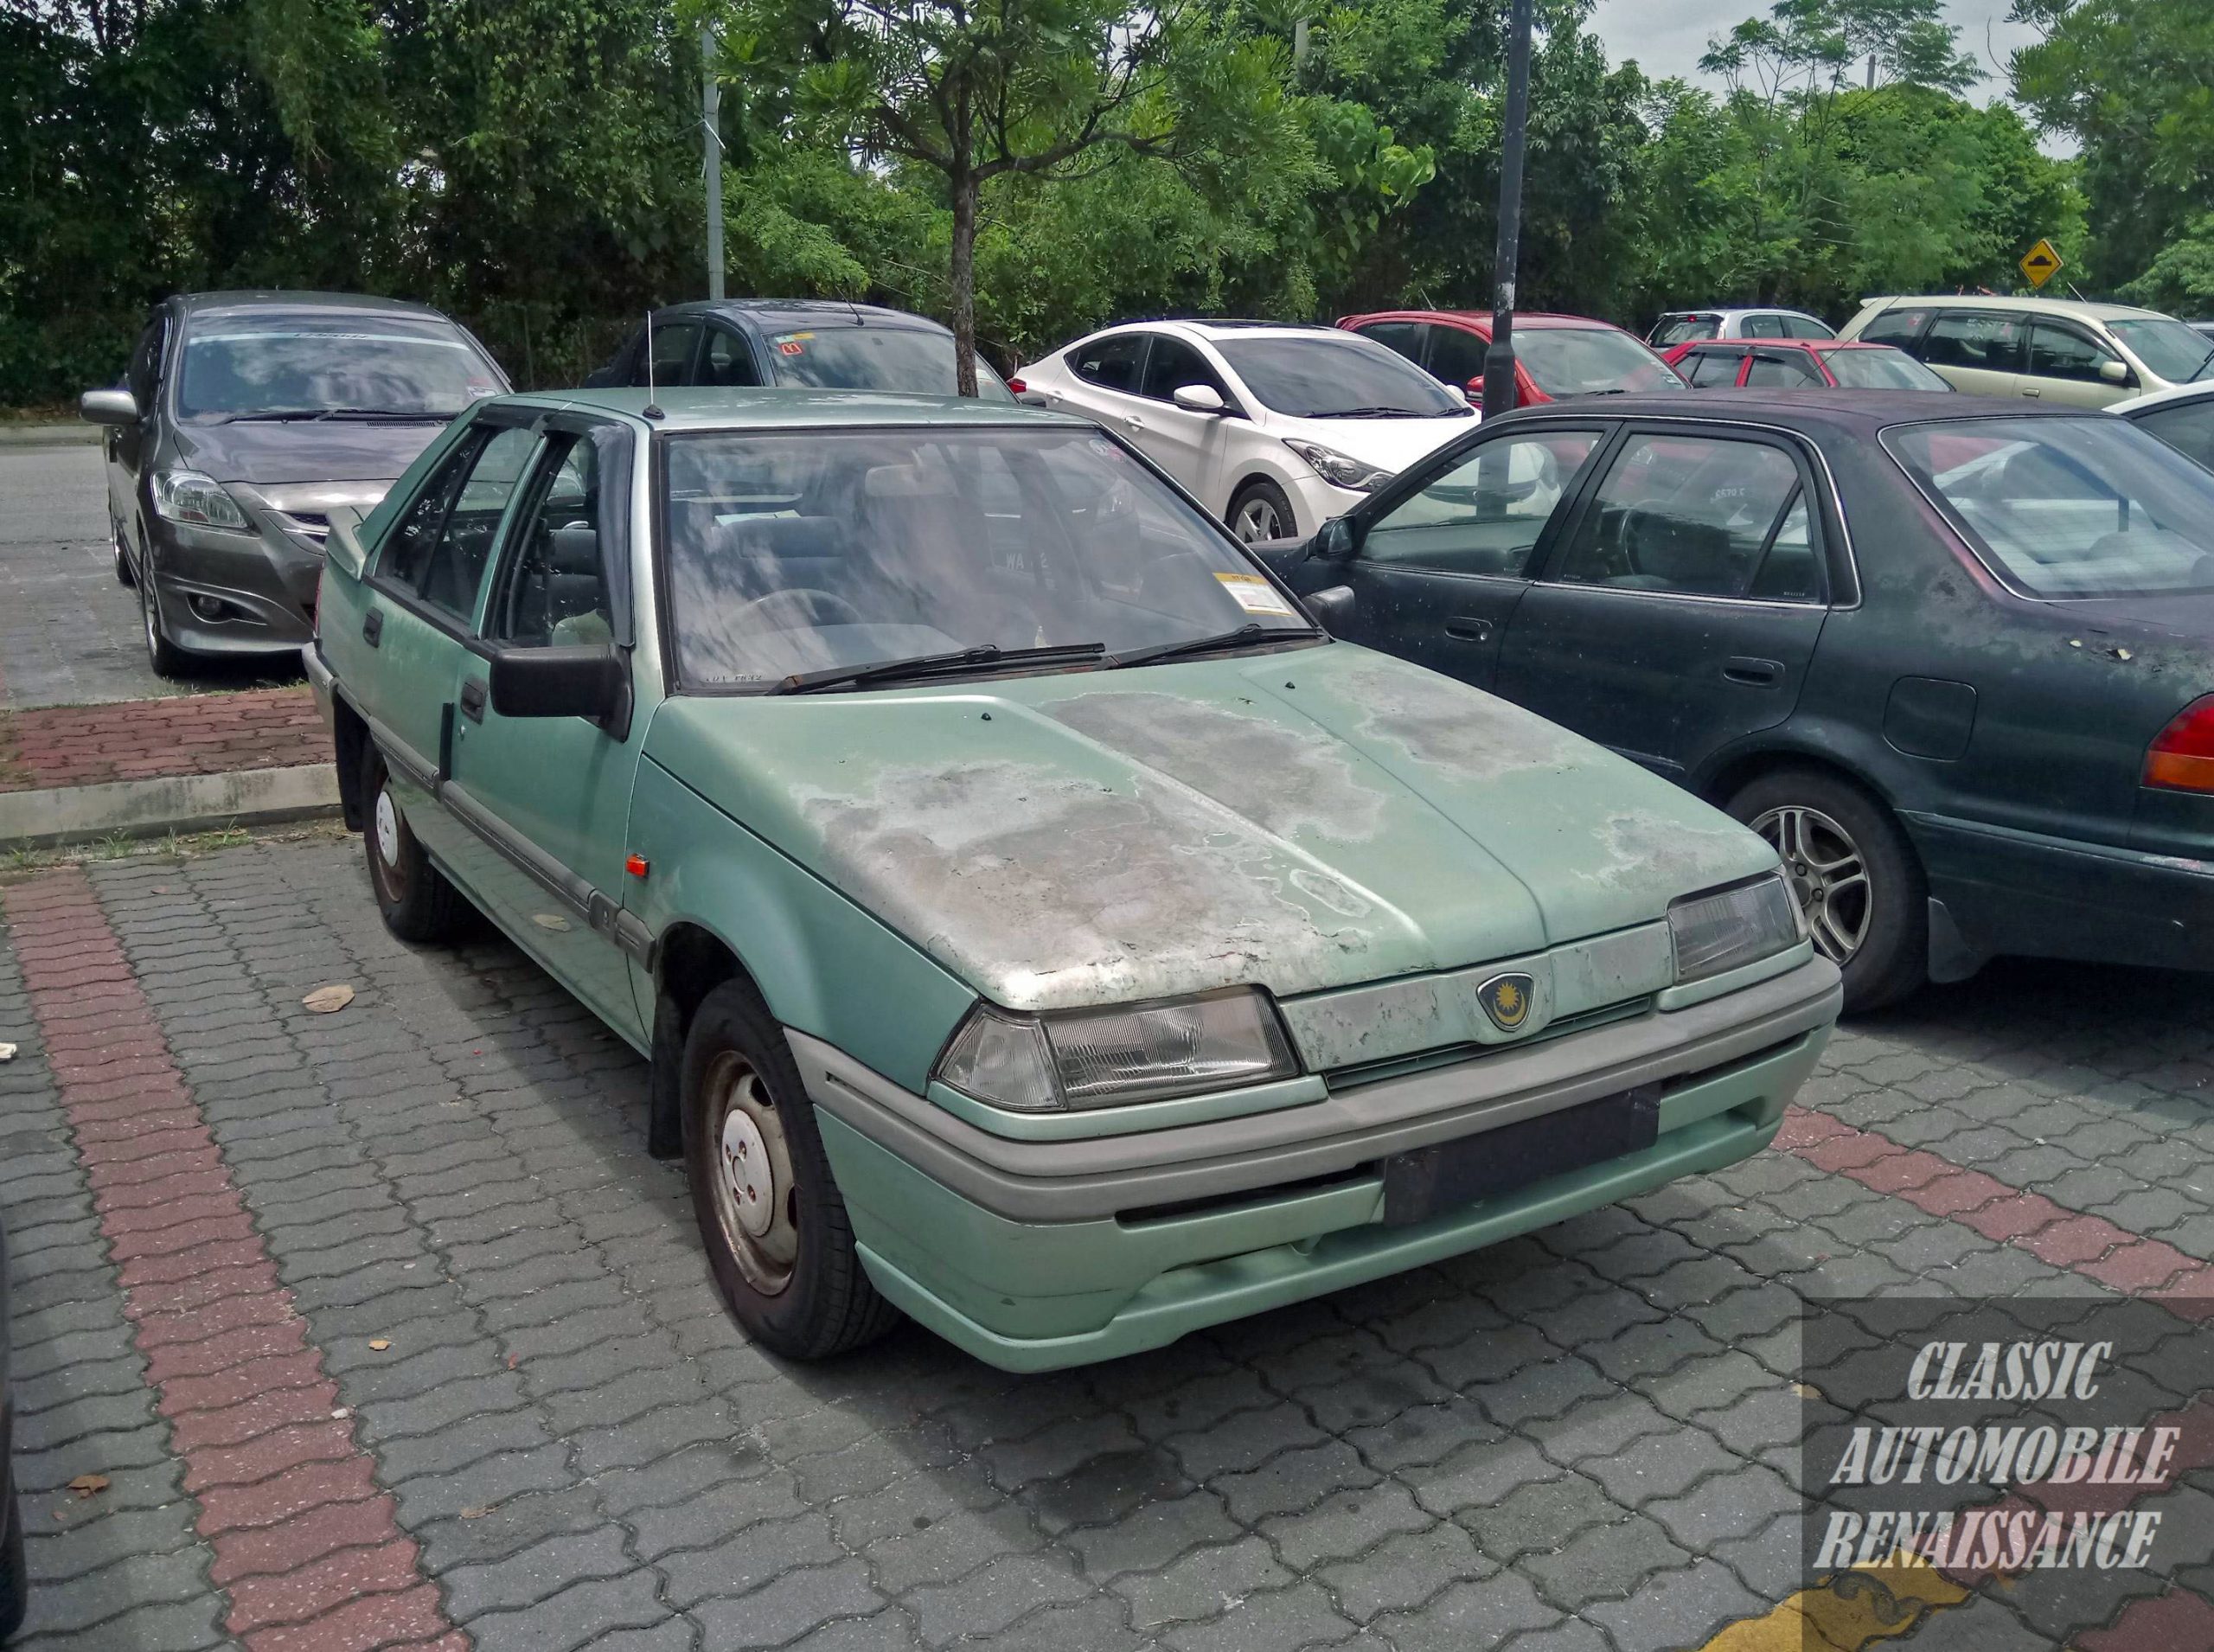 Ken's Proton Saga was inherited from his grandfather. At the time, the car was in poor shape. Image credit: Classic Automobile Renaissance